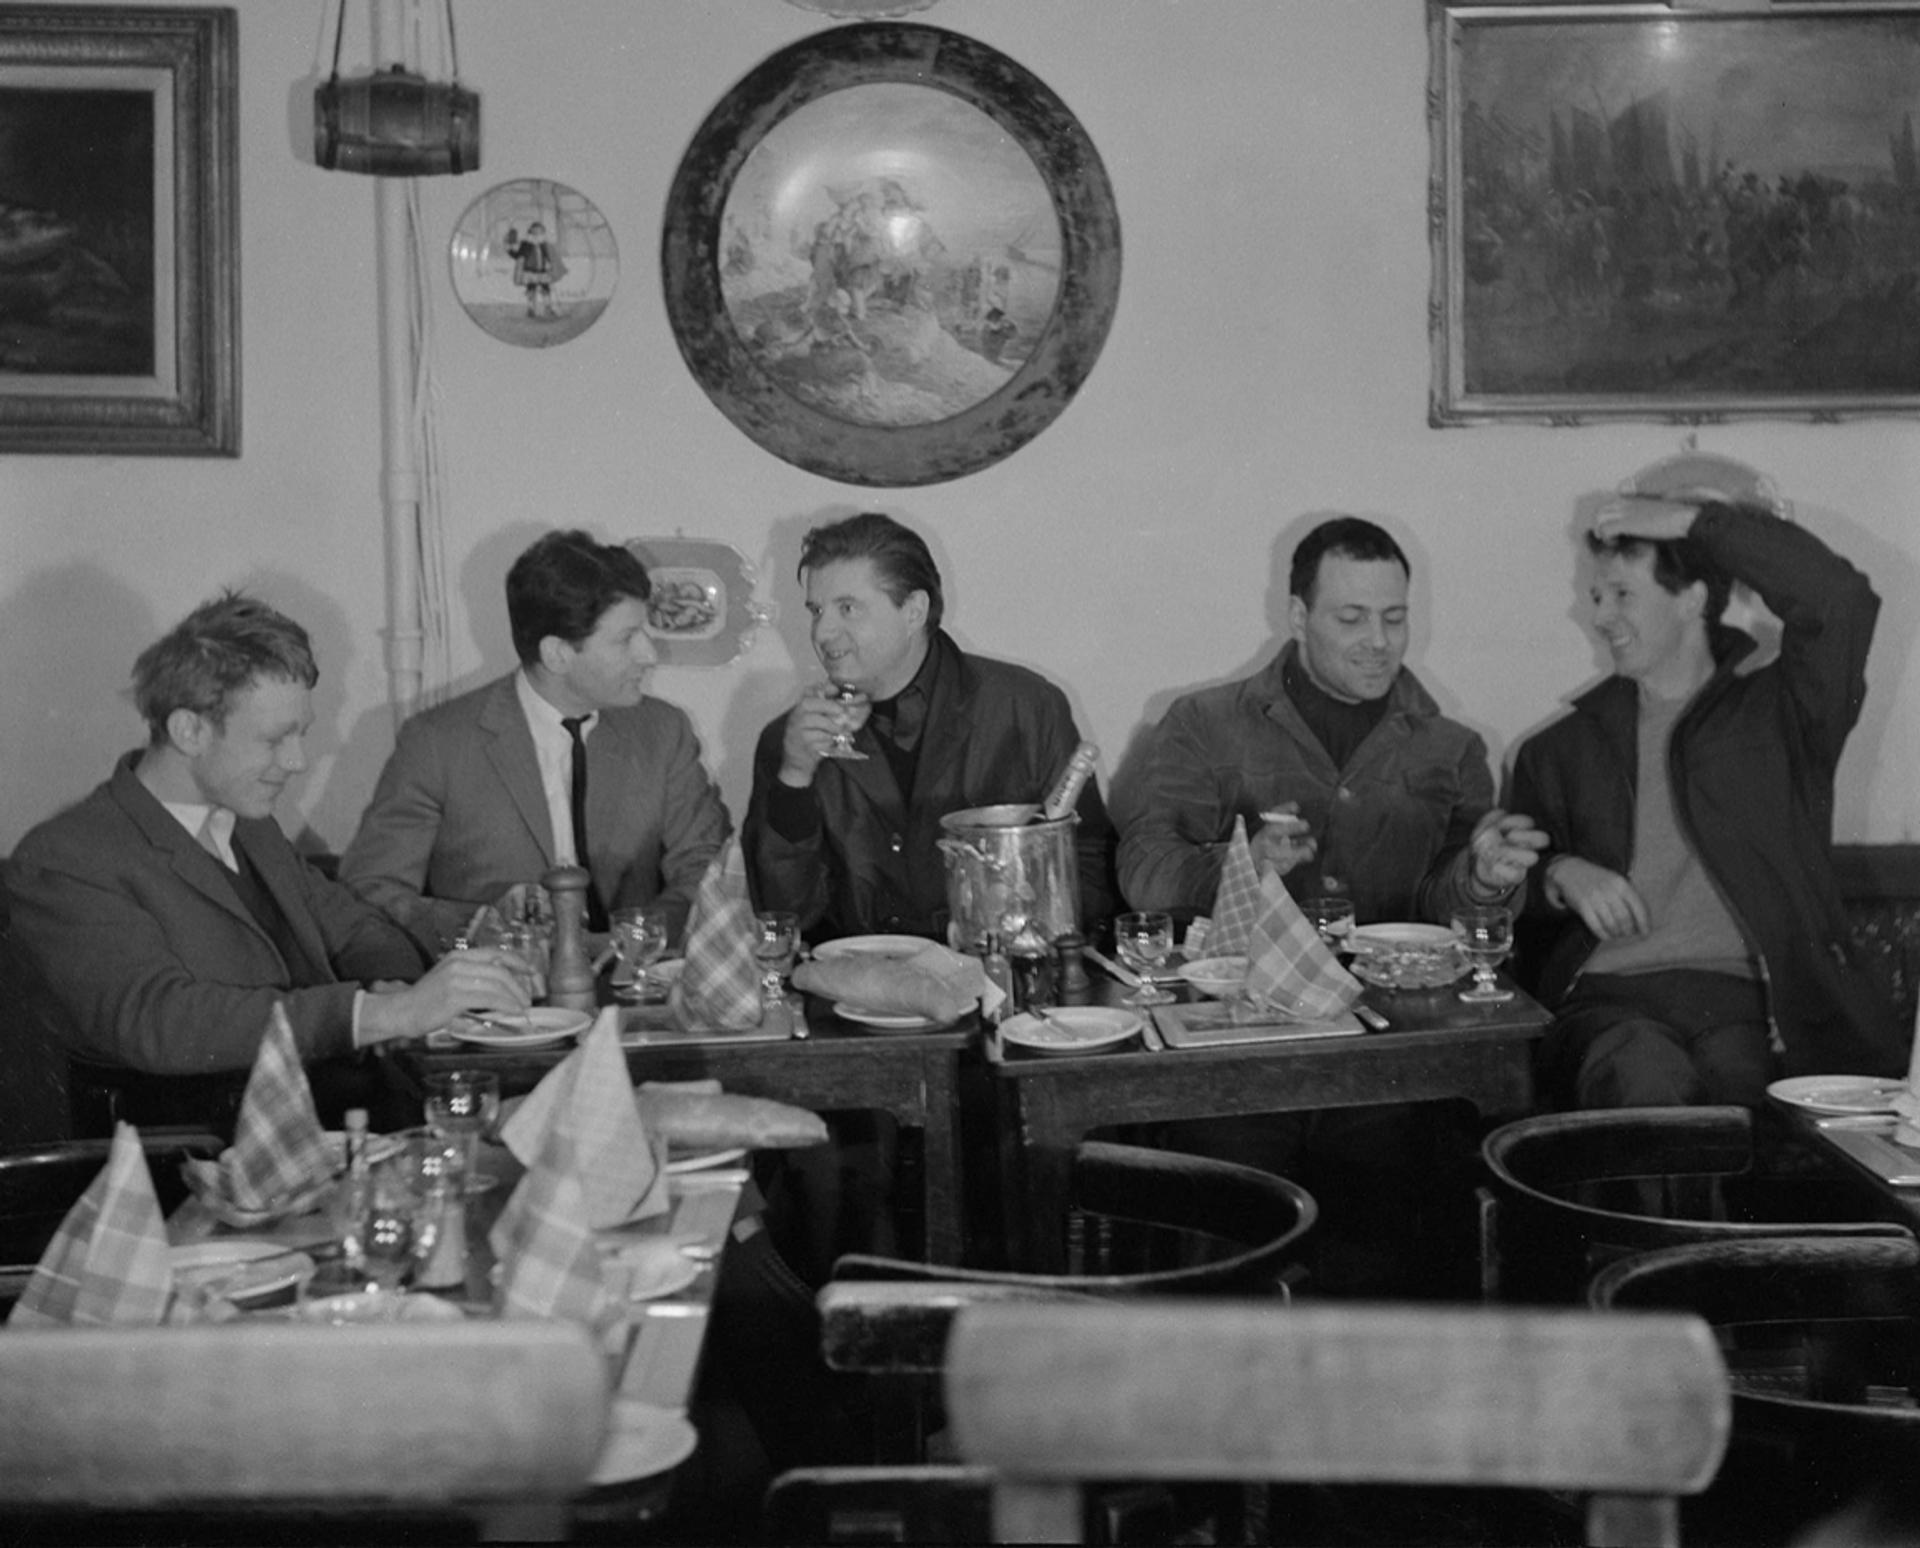 Group portrait of painters (left to right) Timothy Behrens, Lucian Freud, Francis Bacon, Frank Auerbach and Michael Andrews at Wheelers Restaurant in Soho, London, 1963 © John Deakin / John Deakin Archive / Bridgeman Images